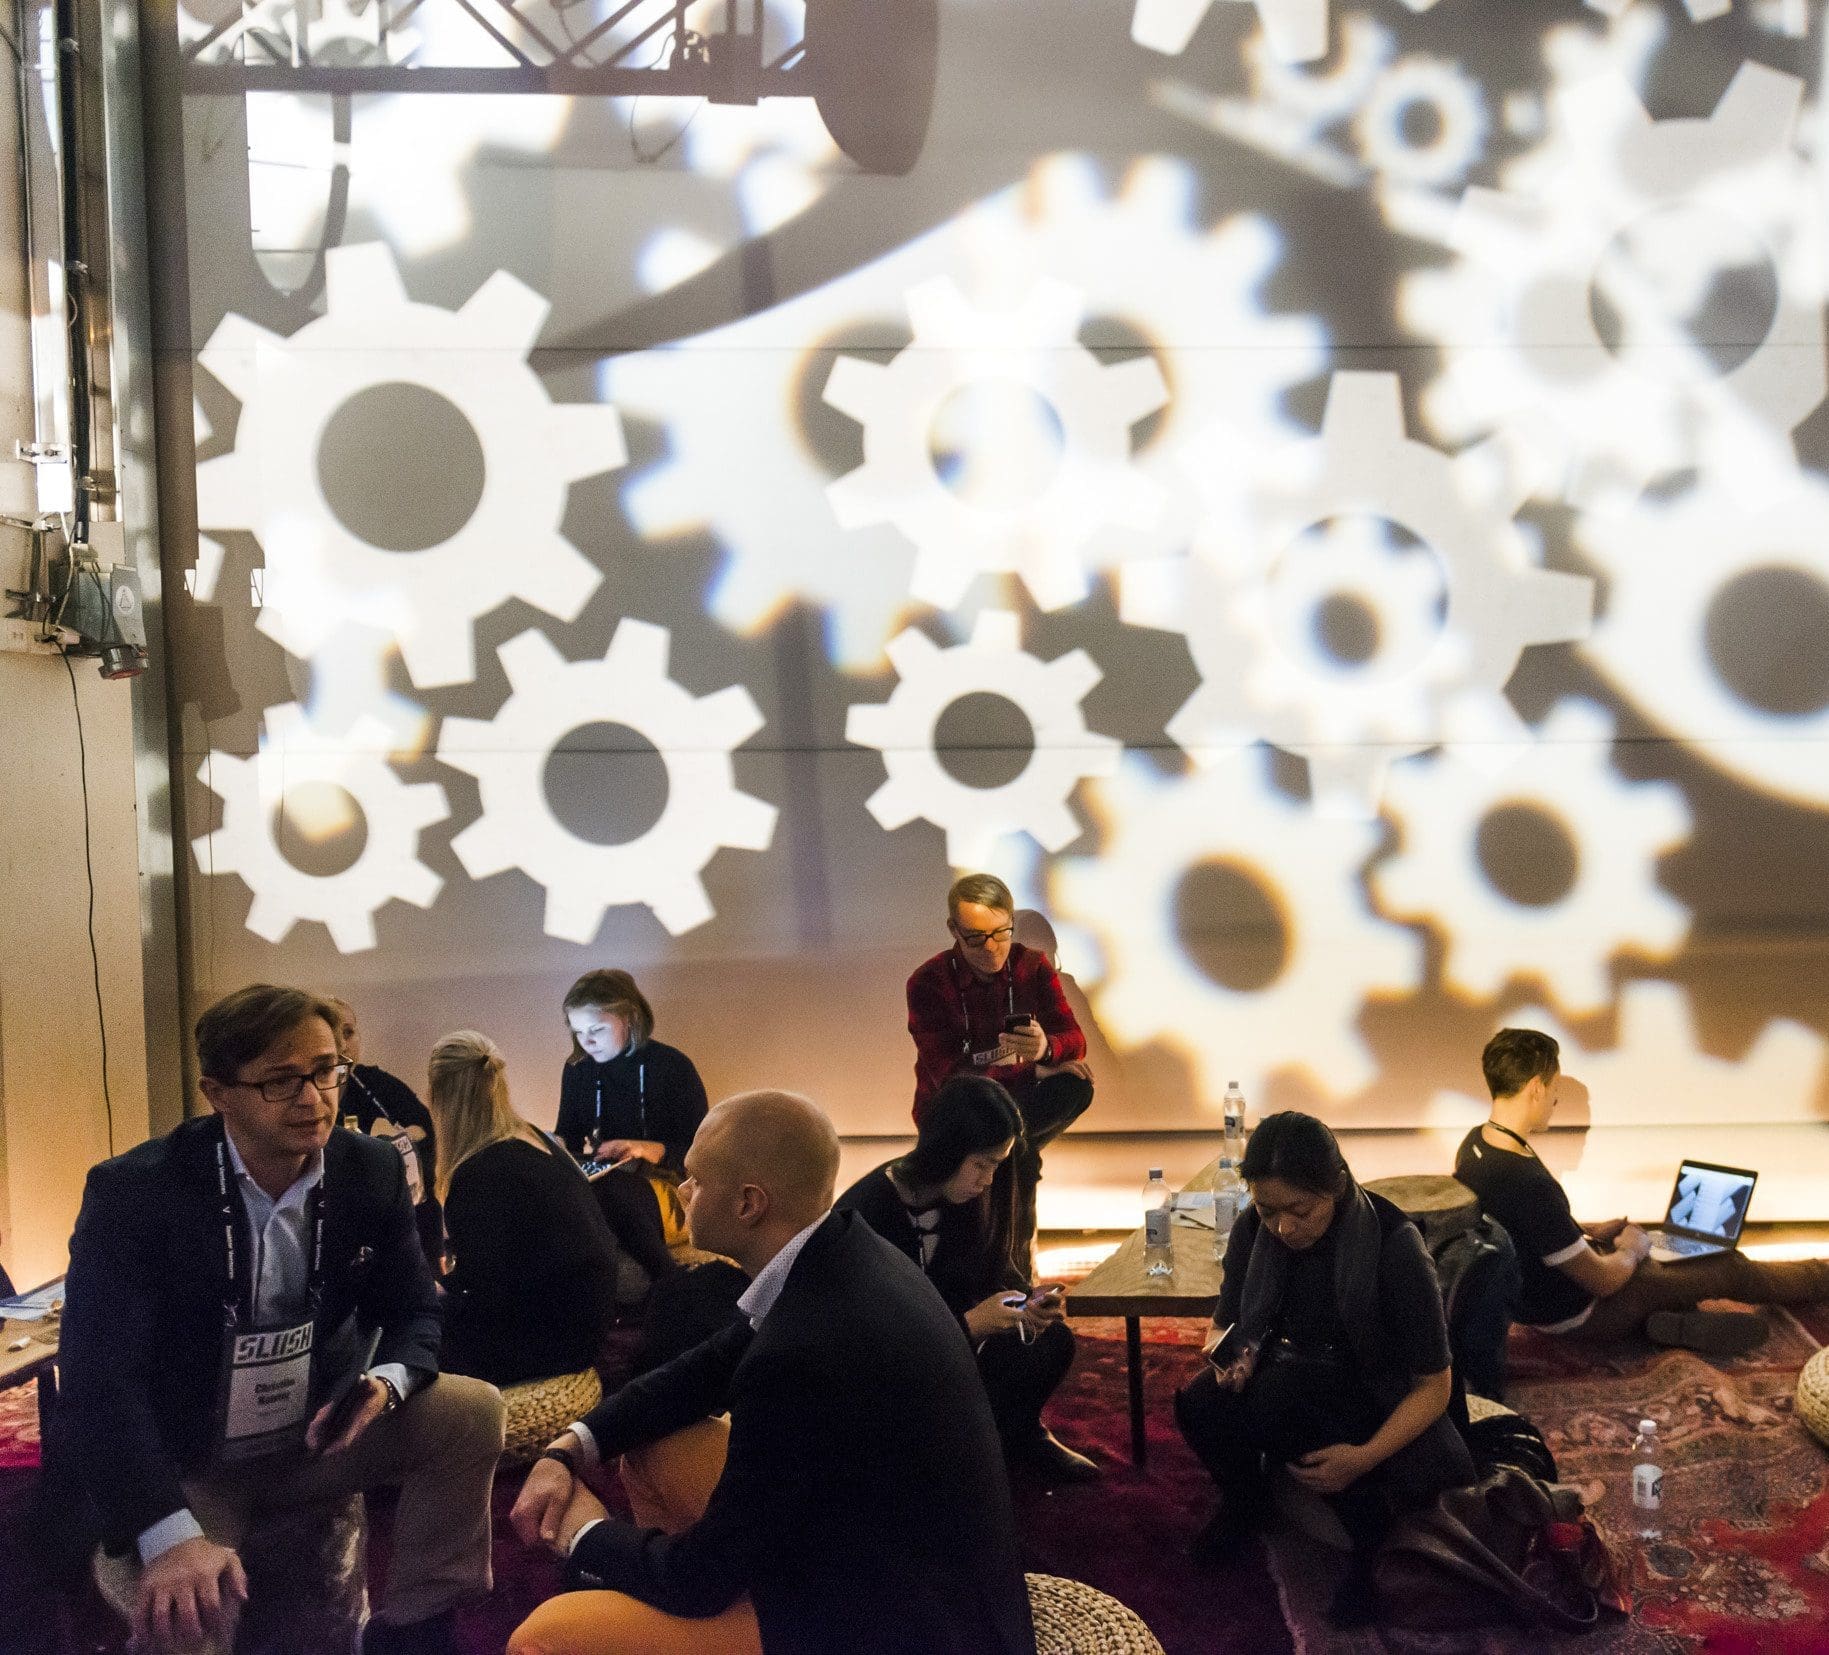 In an event at Slush, a group of business people are sat on large cushions on the floor as they discuss between themselves, while a large projection of cogs is being projected on the wall of the tall space behind them.